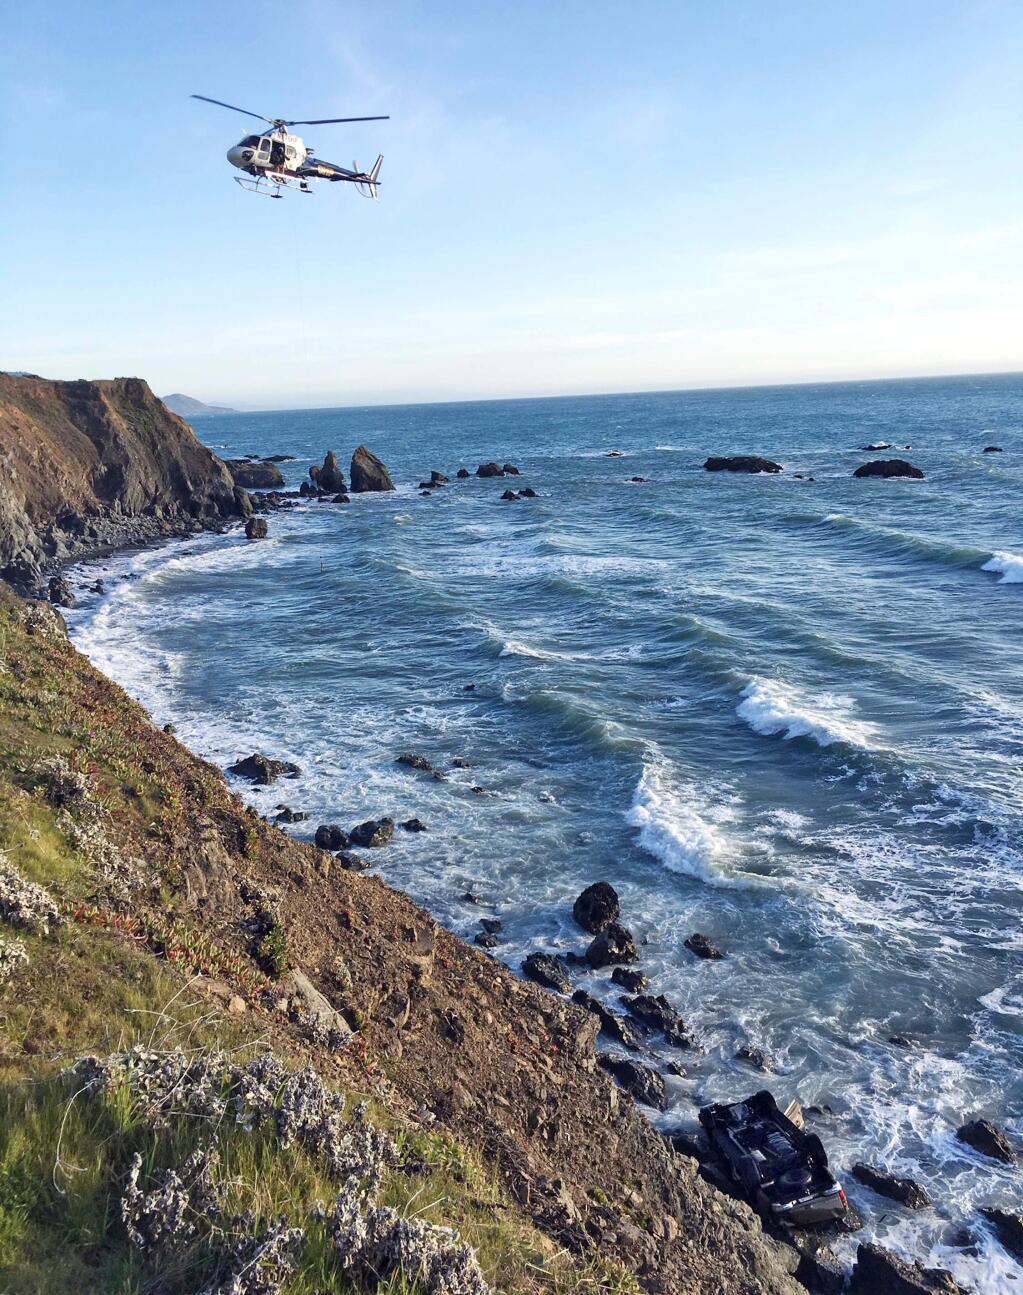 FILE - This March 27, 2018, file photo provided by the California Highway Patrol shows a helicopter hovering over steep coastal cliffs near Mendocino, Calif., where a vehicle, visible at lower right, plunged about 100 feet off a cliff along Highway 1, killing all passengers. (California Highway Patrol via AP, File)